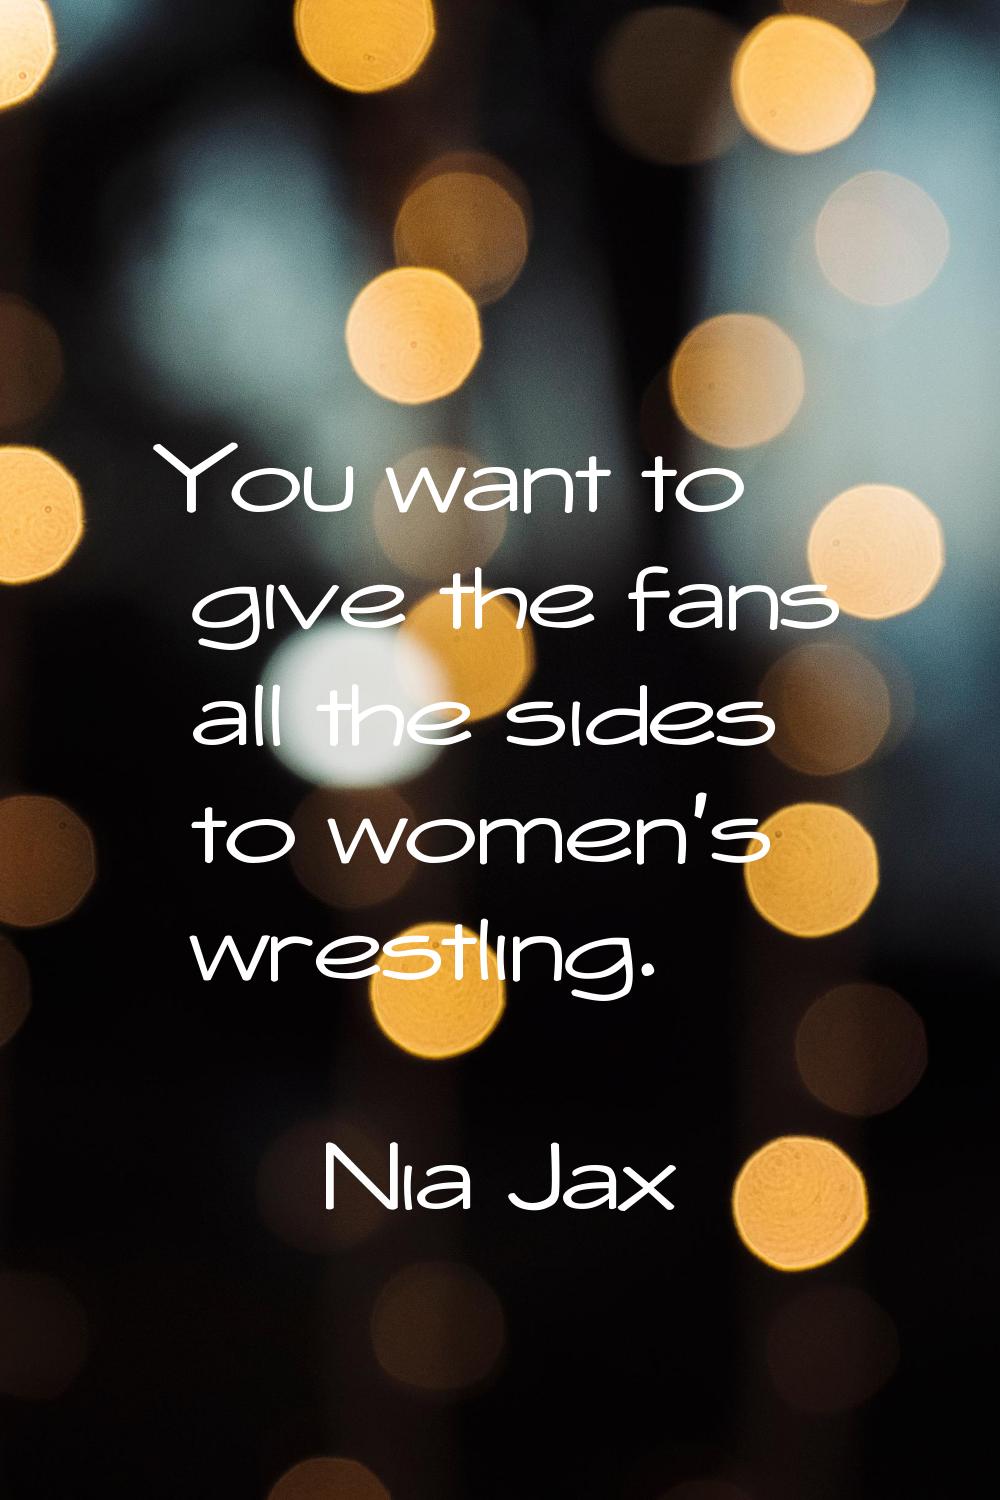 You want to give the fans all the sides to women's wrestling.